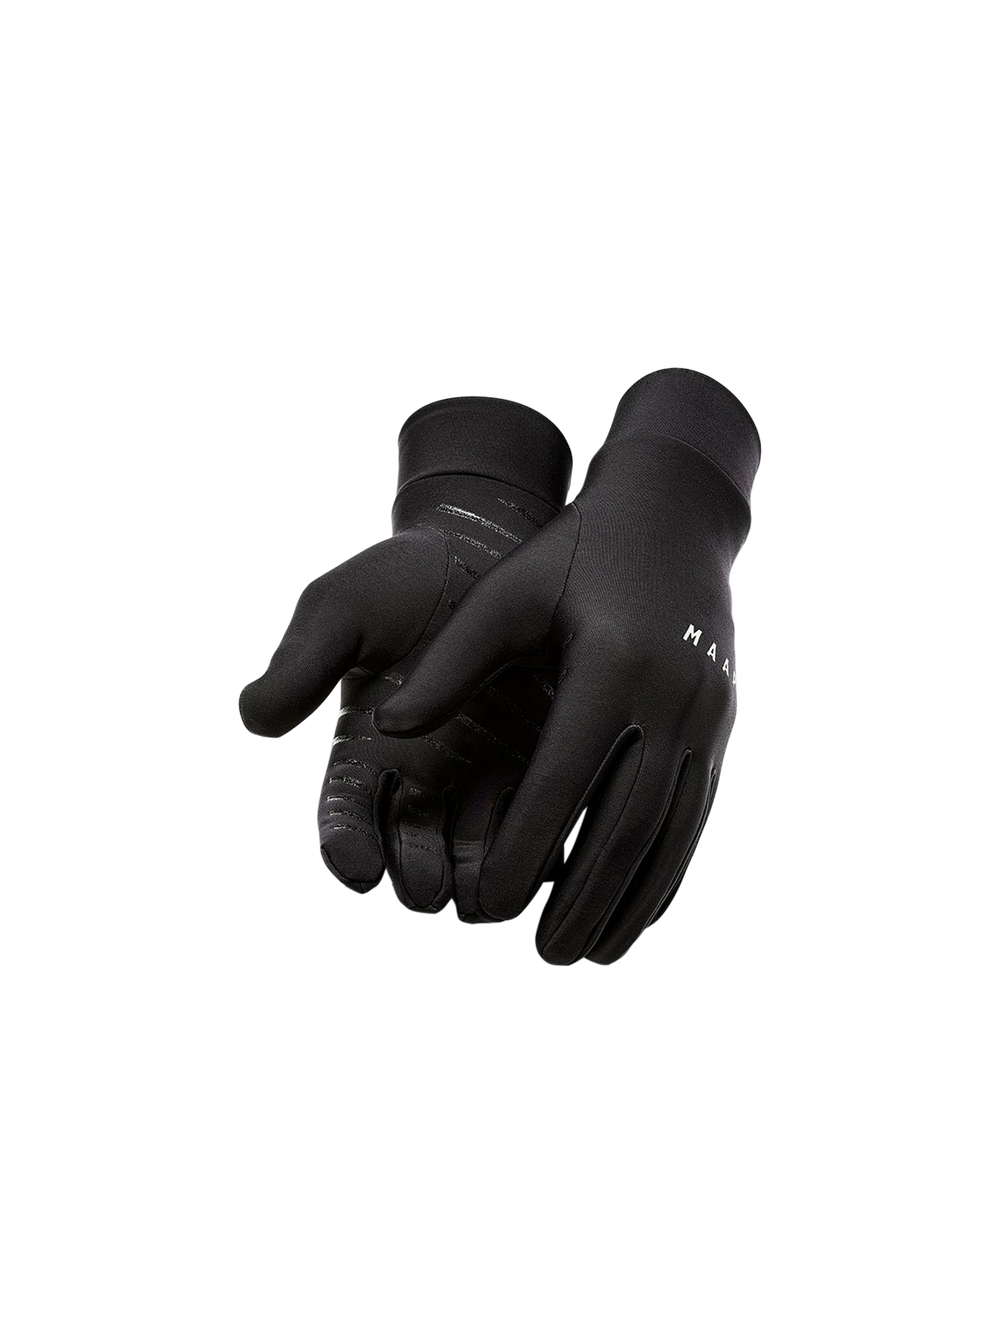 Product Image for Base Glove